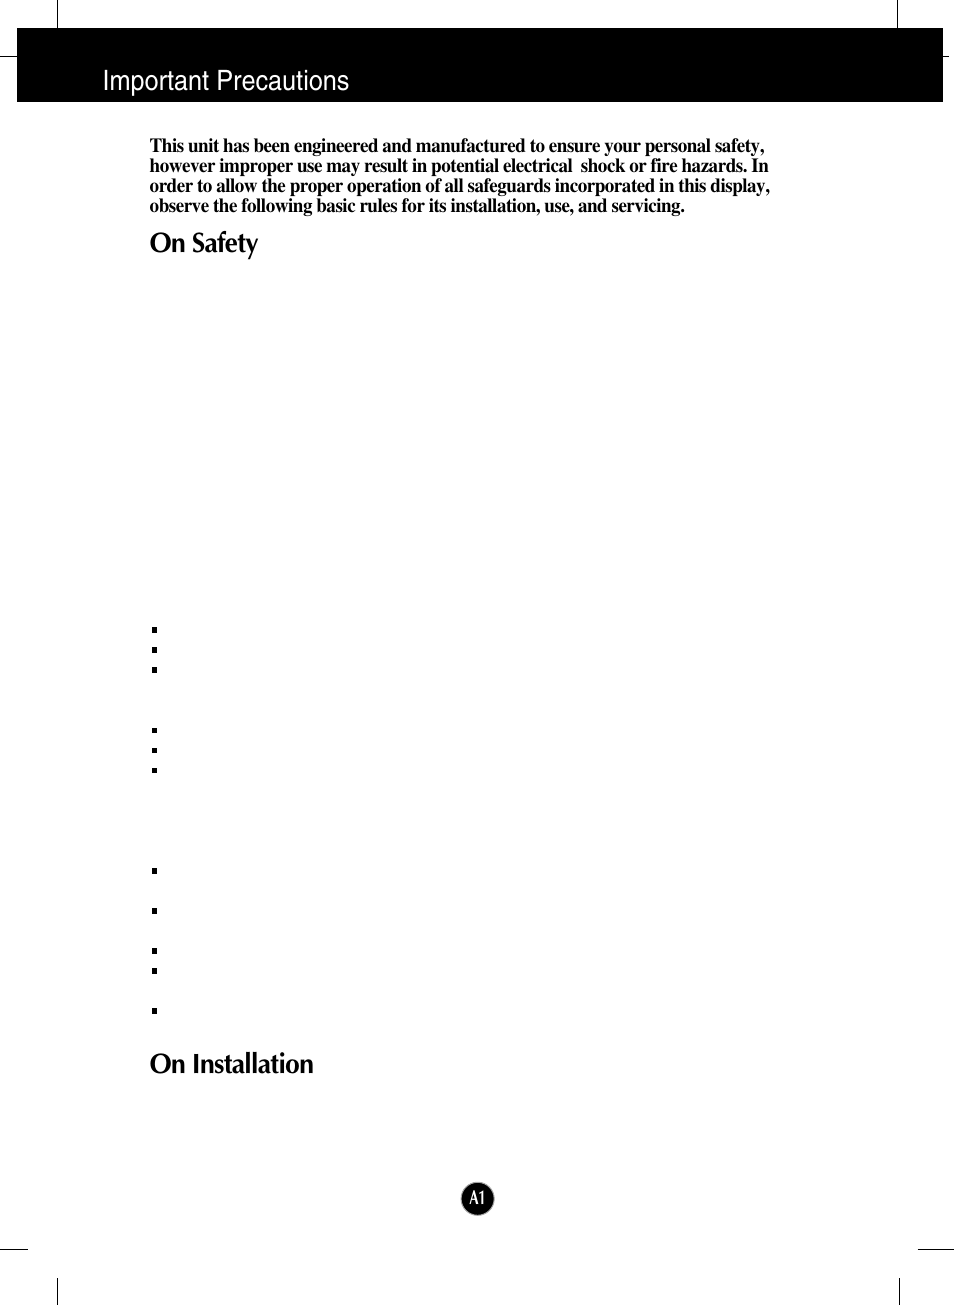 Important precautions, On safety, On installation | LG W2234S-BN User Manual | Page 2 / 24